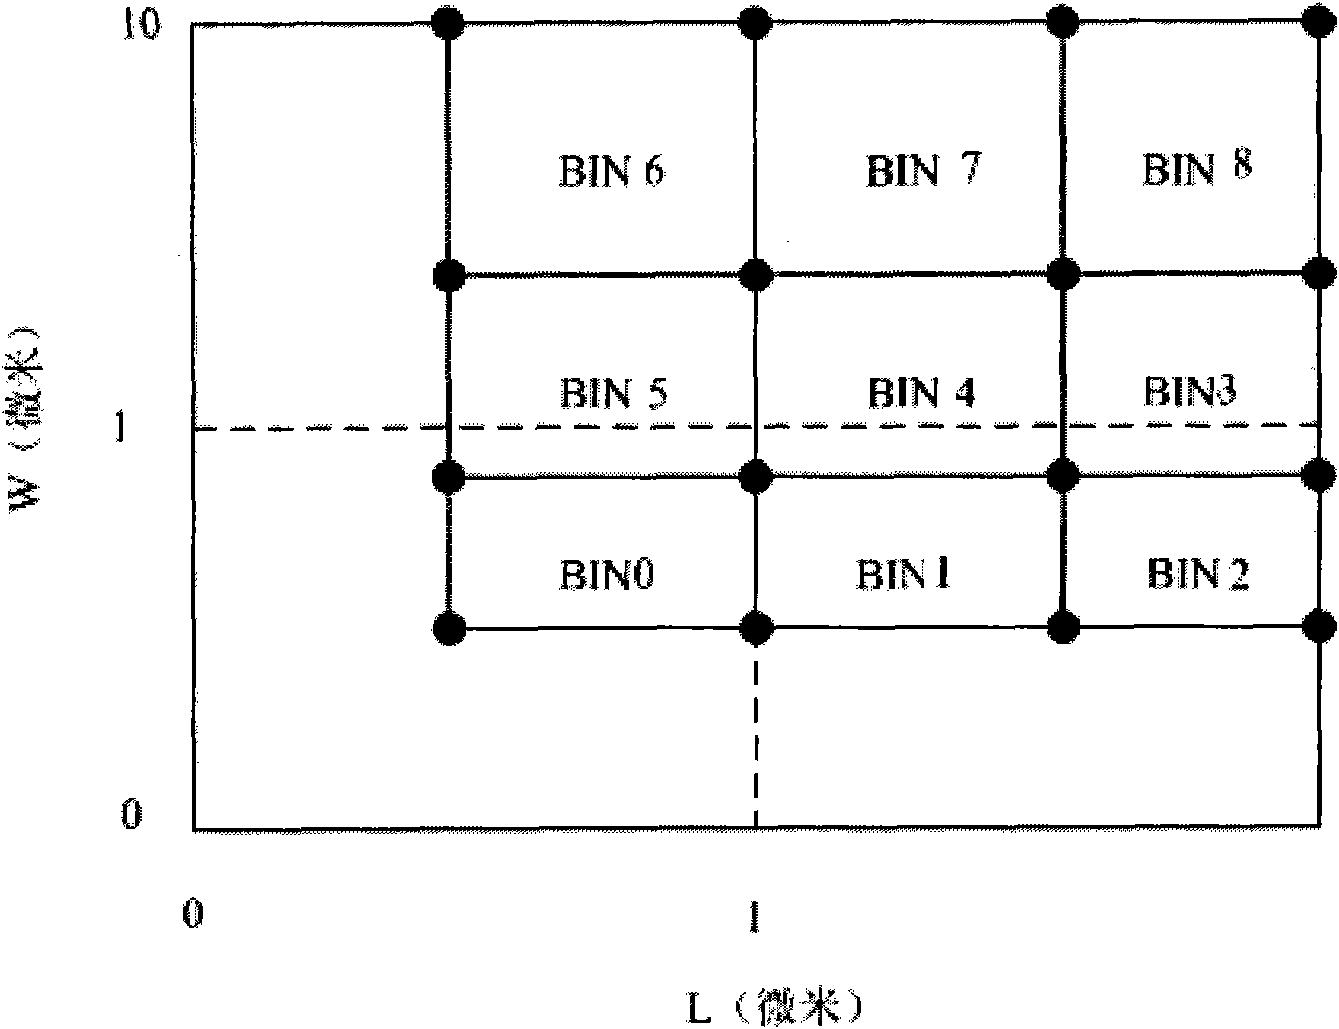 Method for building MOSFET (Metal-Oxide-Semiconductor Field Effect Transistor) model